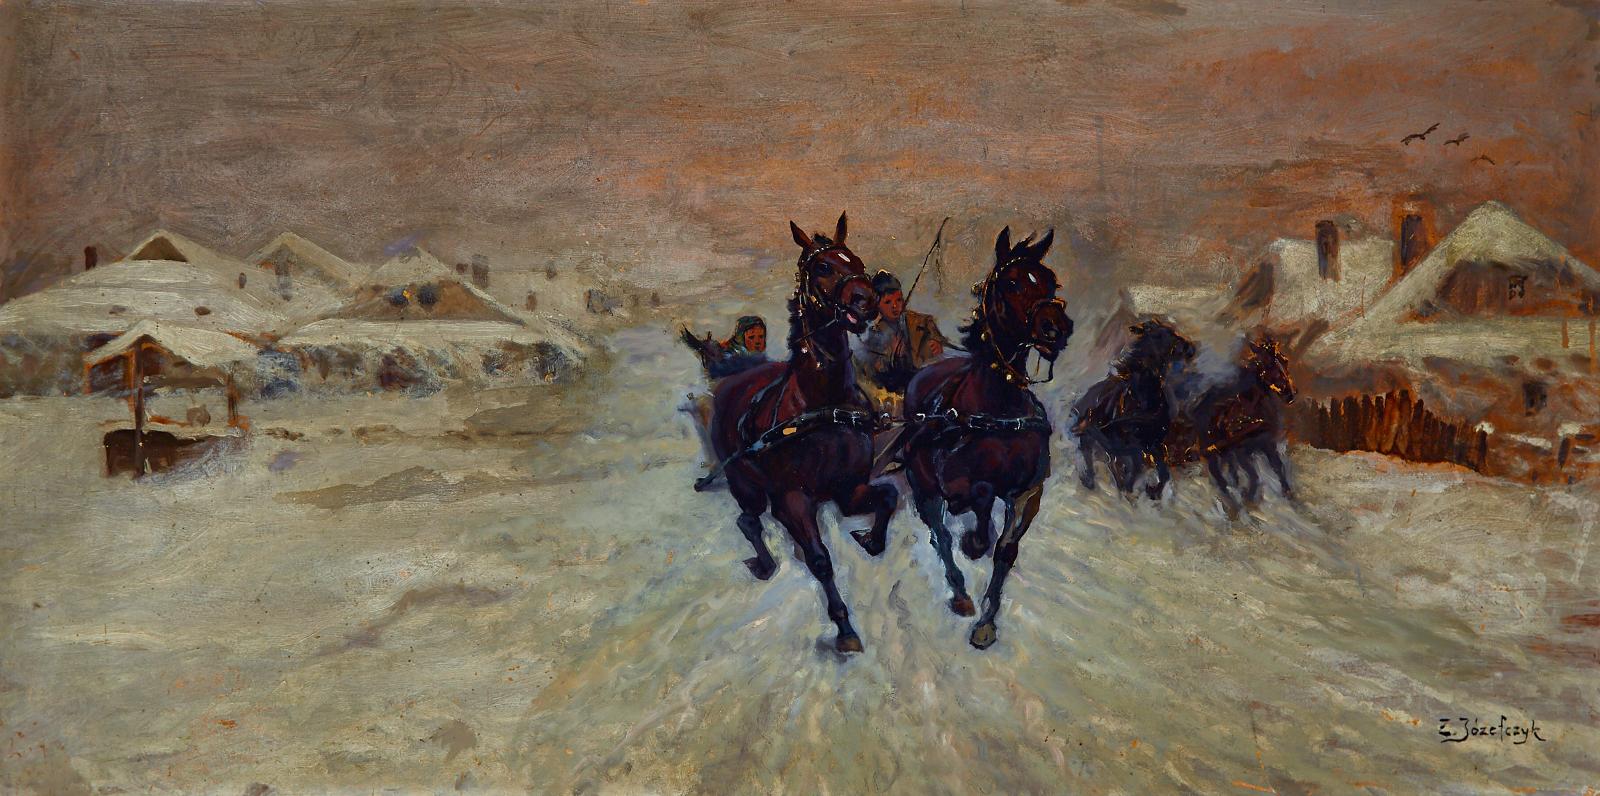 Zygmunt Józefczyk (1881-1966) - Horse Carts In The Winter